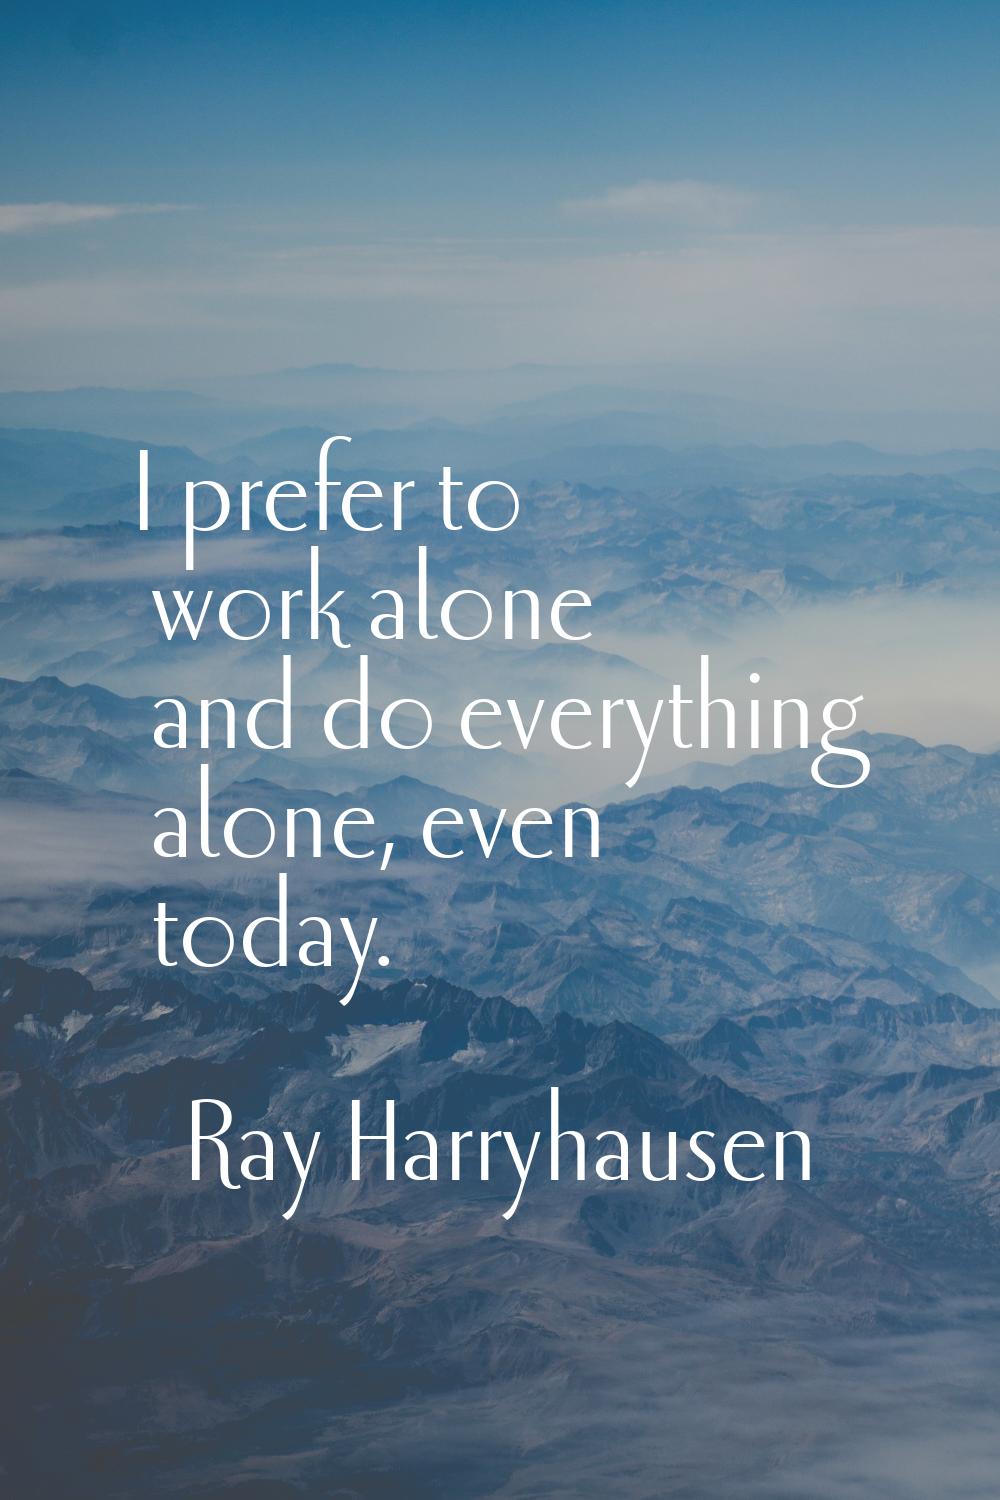 I prefer to work alone and do everything alone, even today.